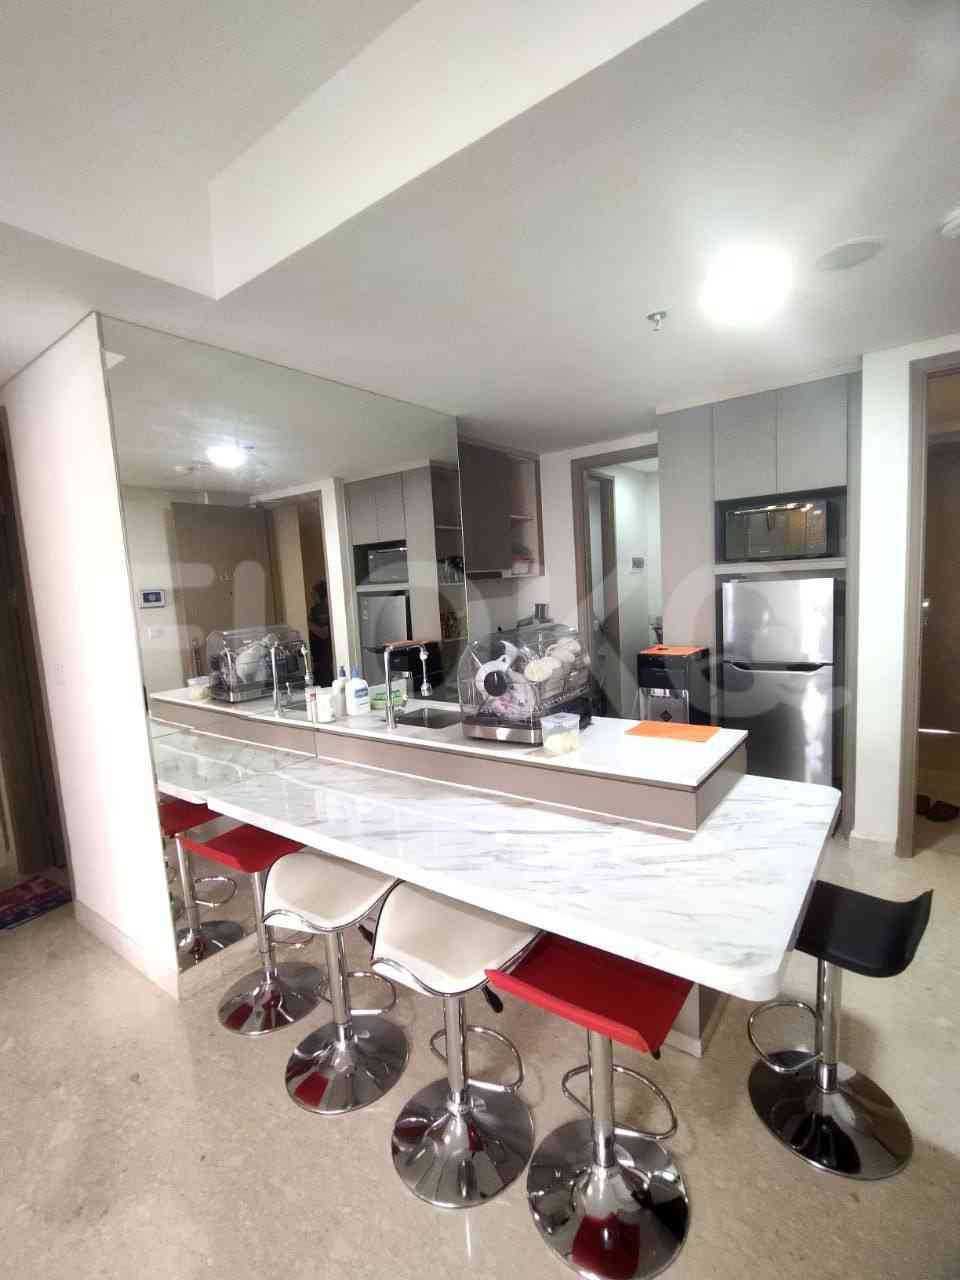 3 Bedroom on 25th Floor for Rent in Gold Coast Apartment - fka079 8